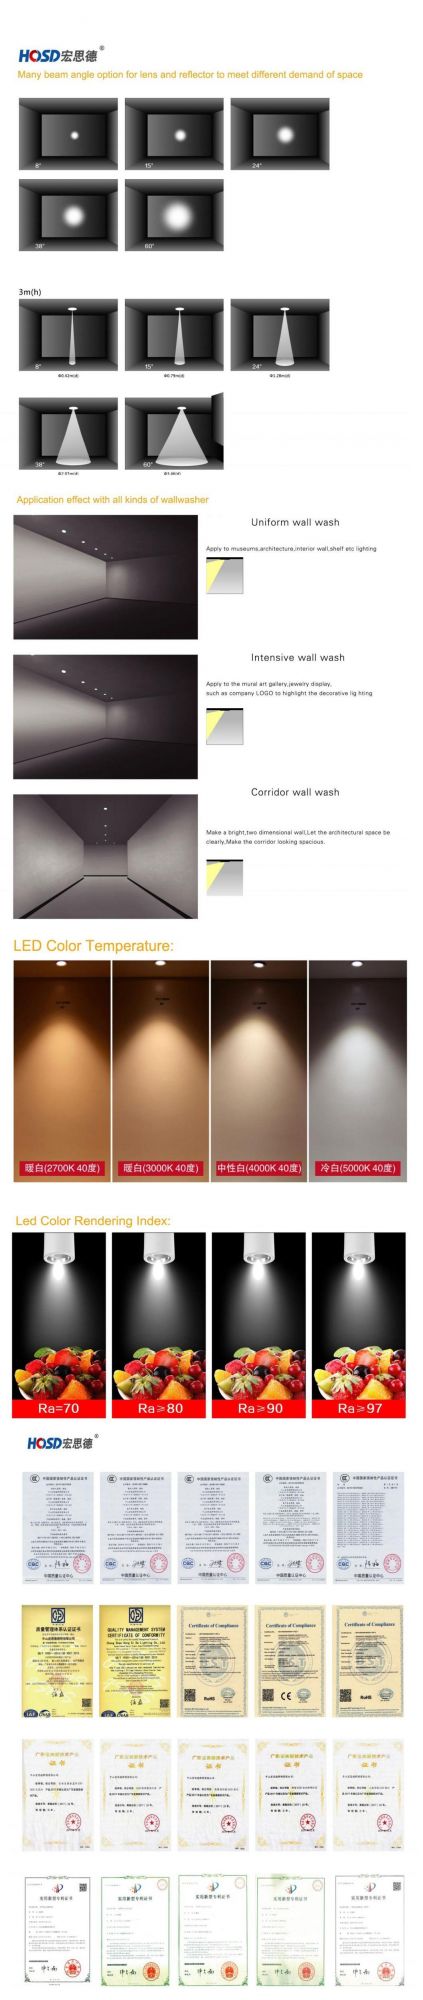 30W-40W CE Europe 3phase Quality Ra95 Bridgelux Osram COB Ceiling Spotlight LED Track Light for Shoes Clothes Chain Stores Mall Jewelry Track Lighting Fixtures